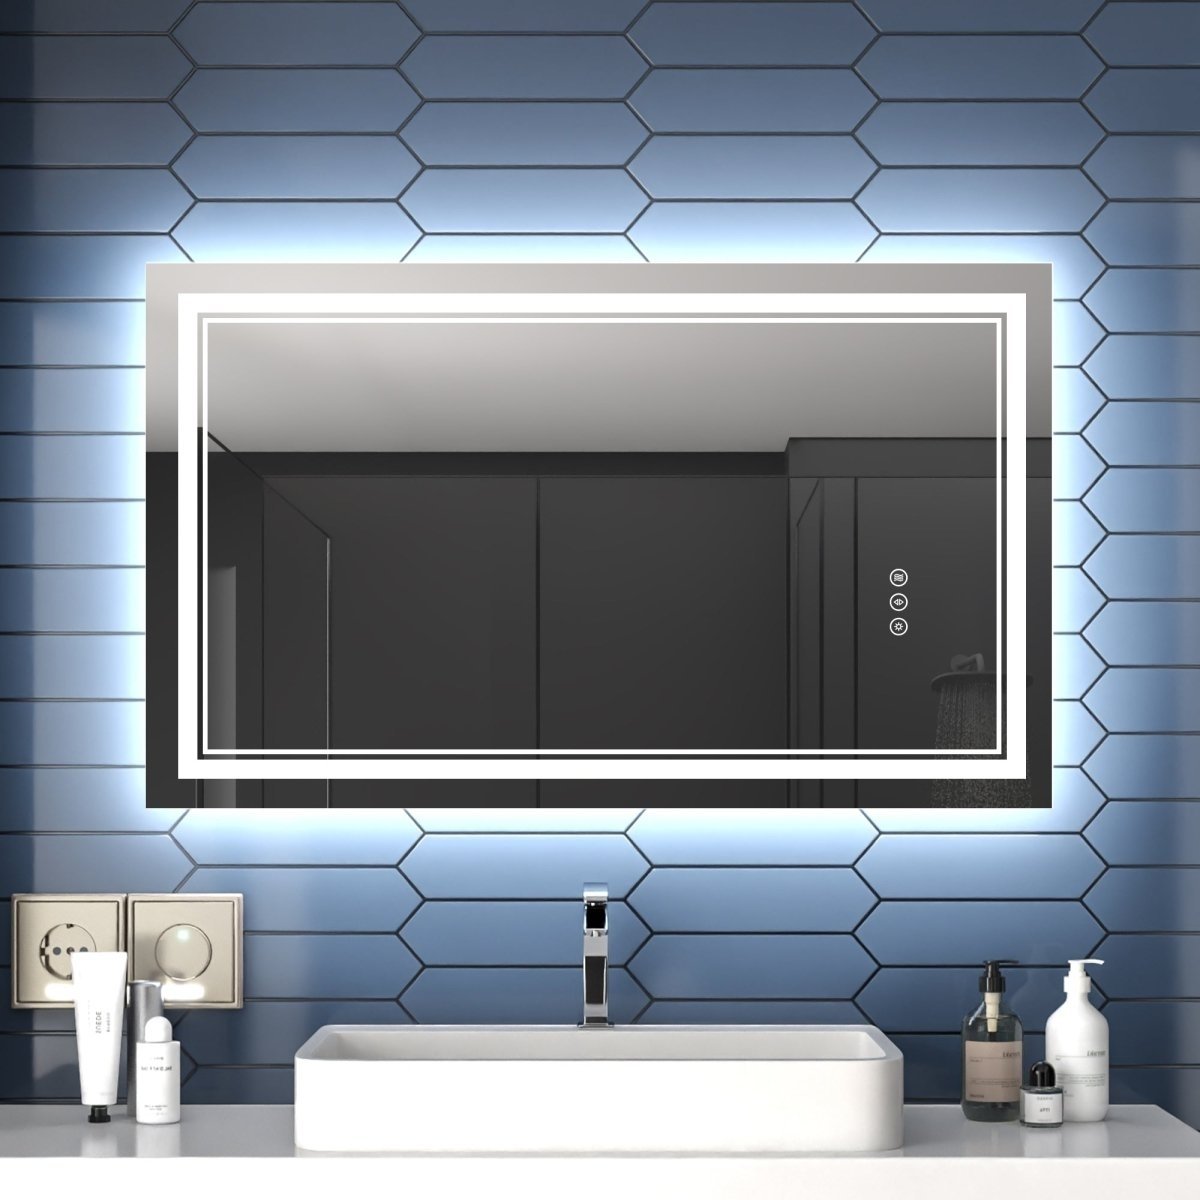 Allsumhome Linea 40&#x22; W x 24&#x22; H LED Heated Bathroom MirrorAnti FogDimmableFront-Lighted and Backlit Tempered Glass